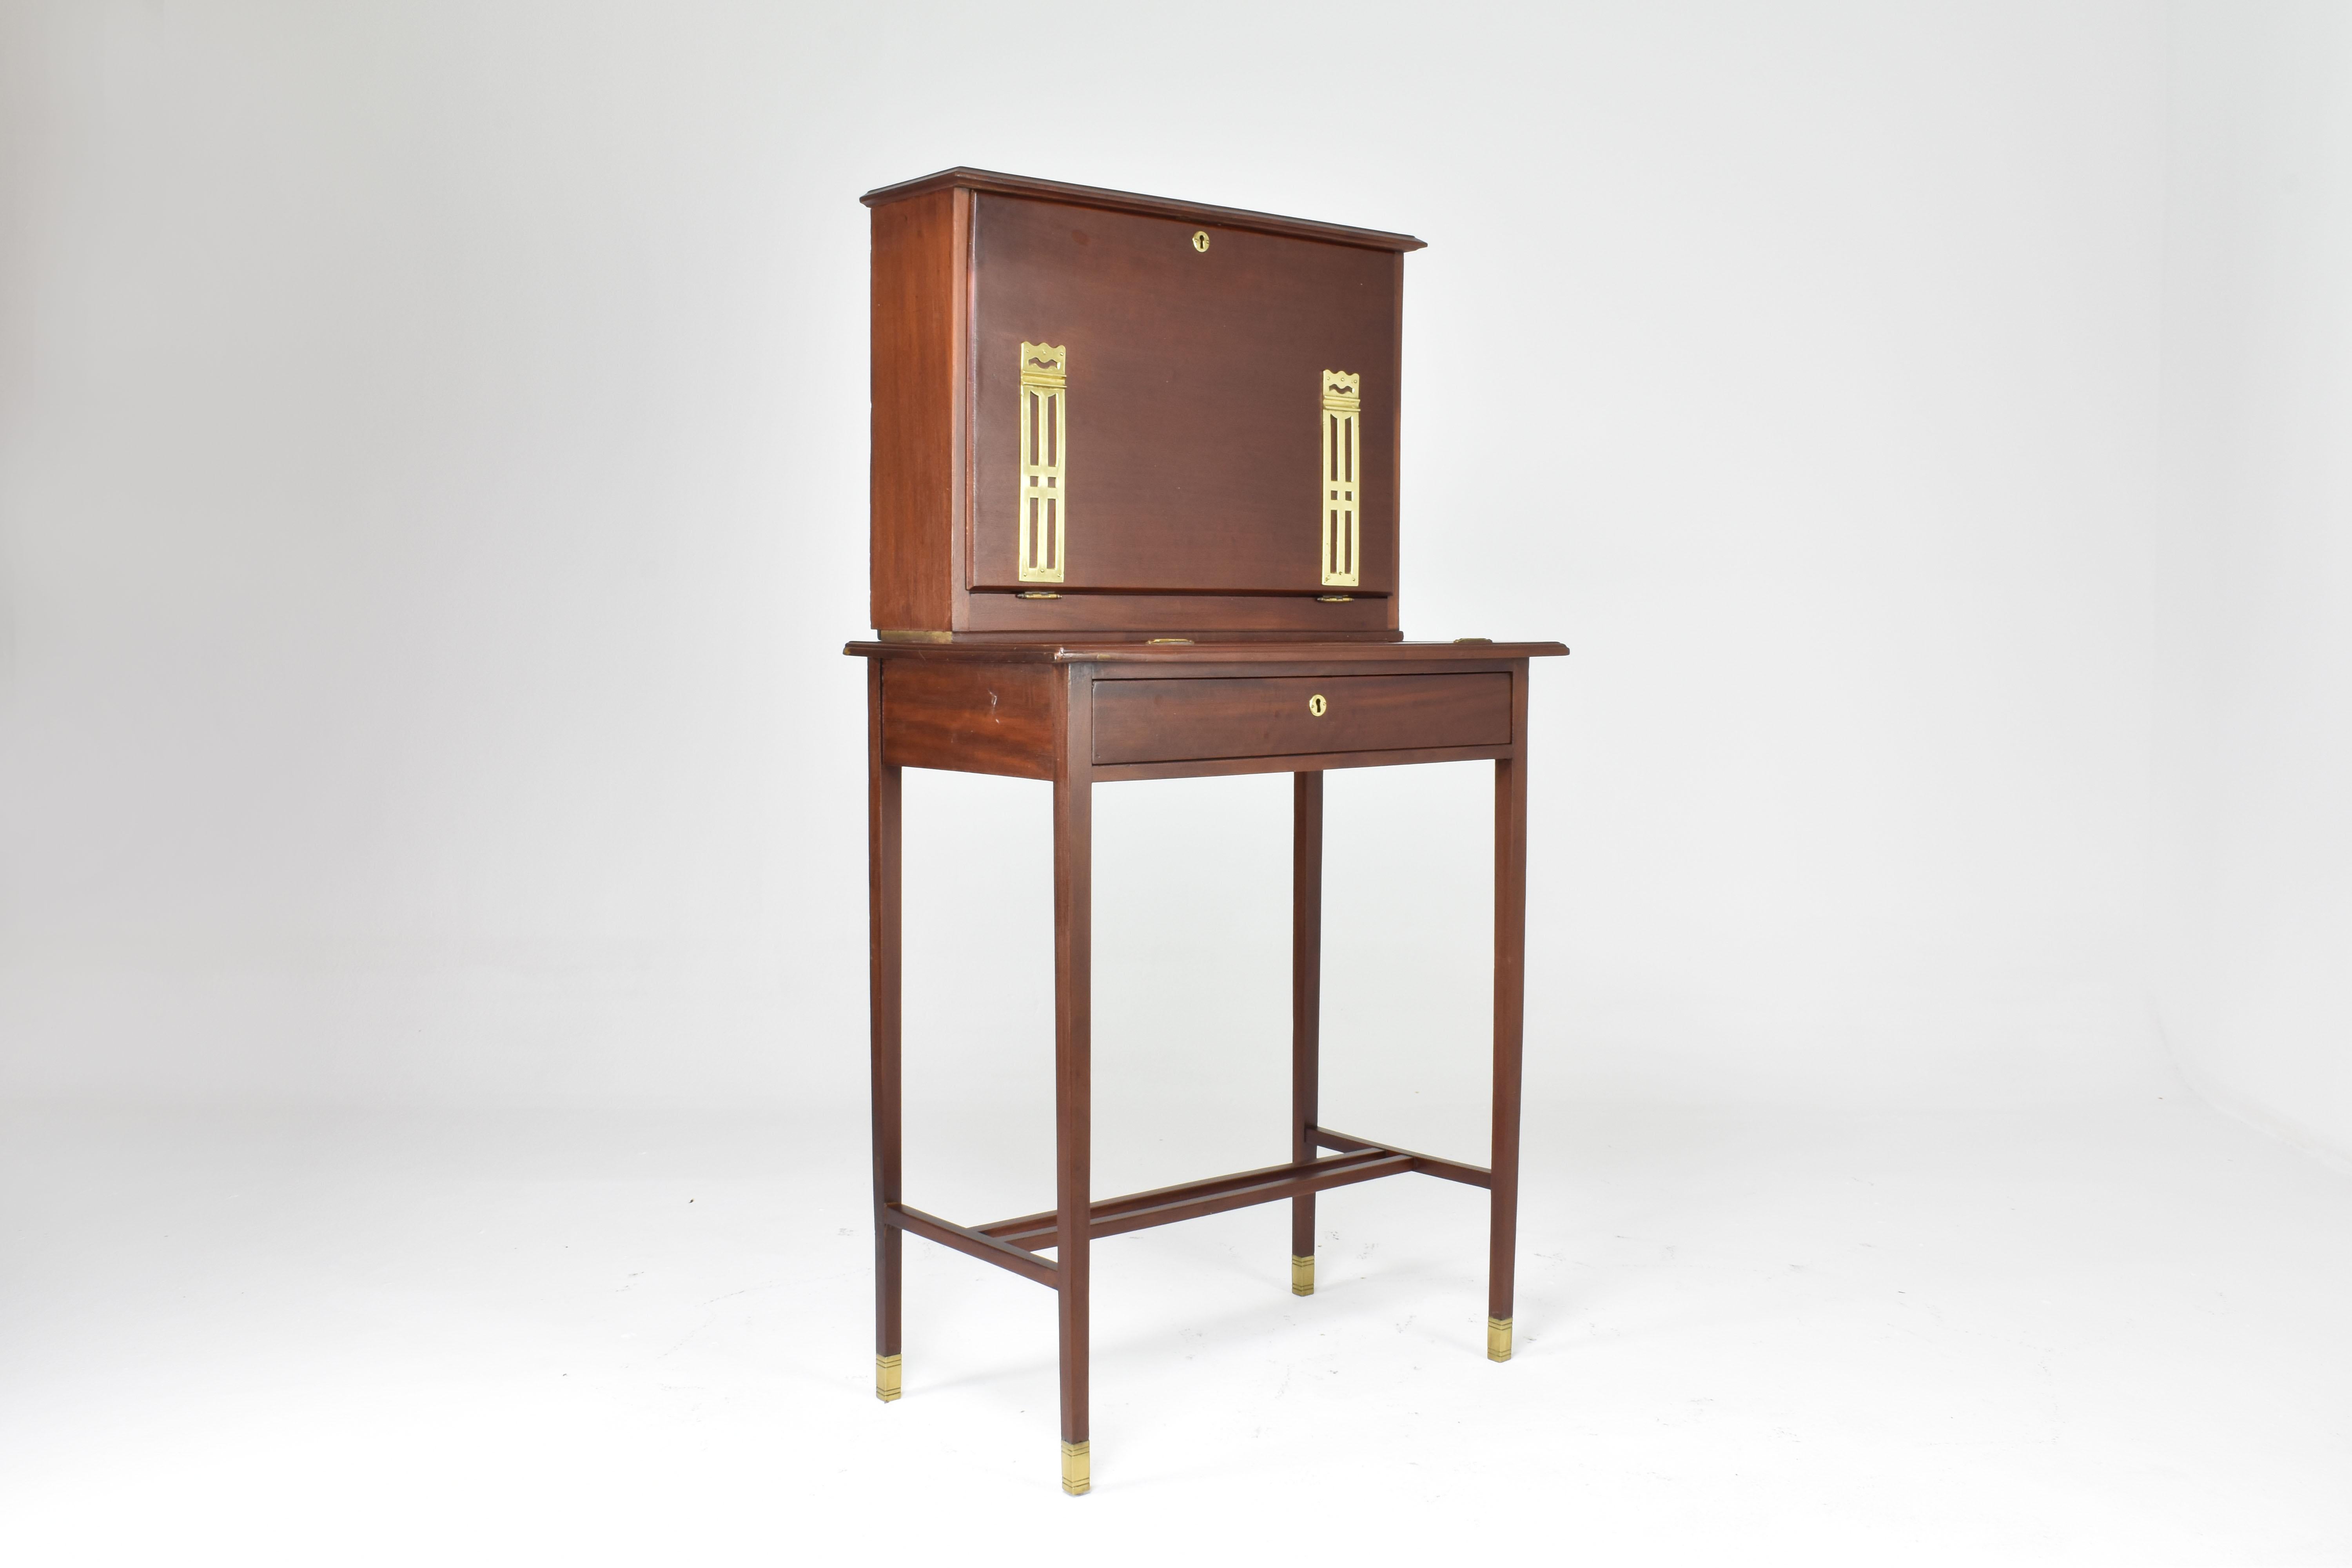 A 20th-century vintage desk from the 1930s of Sheraton Revival style, drawing inspiration from the renowned British furniture designer Thomas Sheraton of the late 18th century. Sheraton's legacy was marked by refined craftsmanship and influences